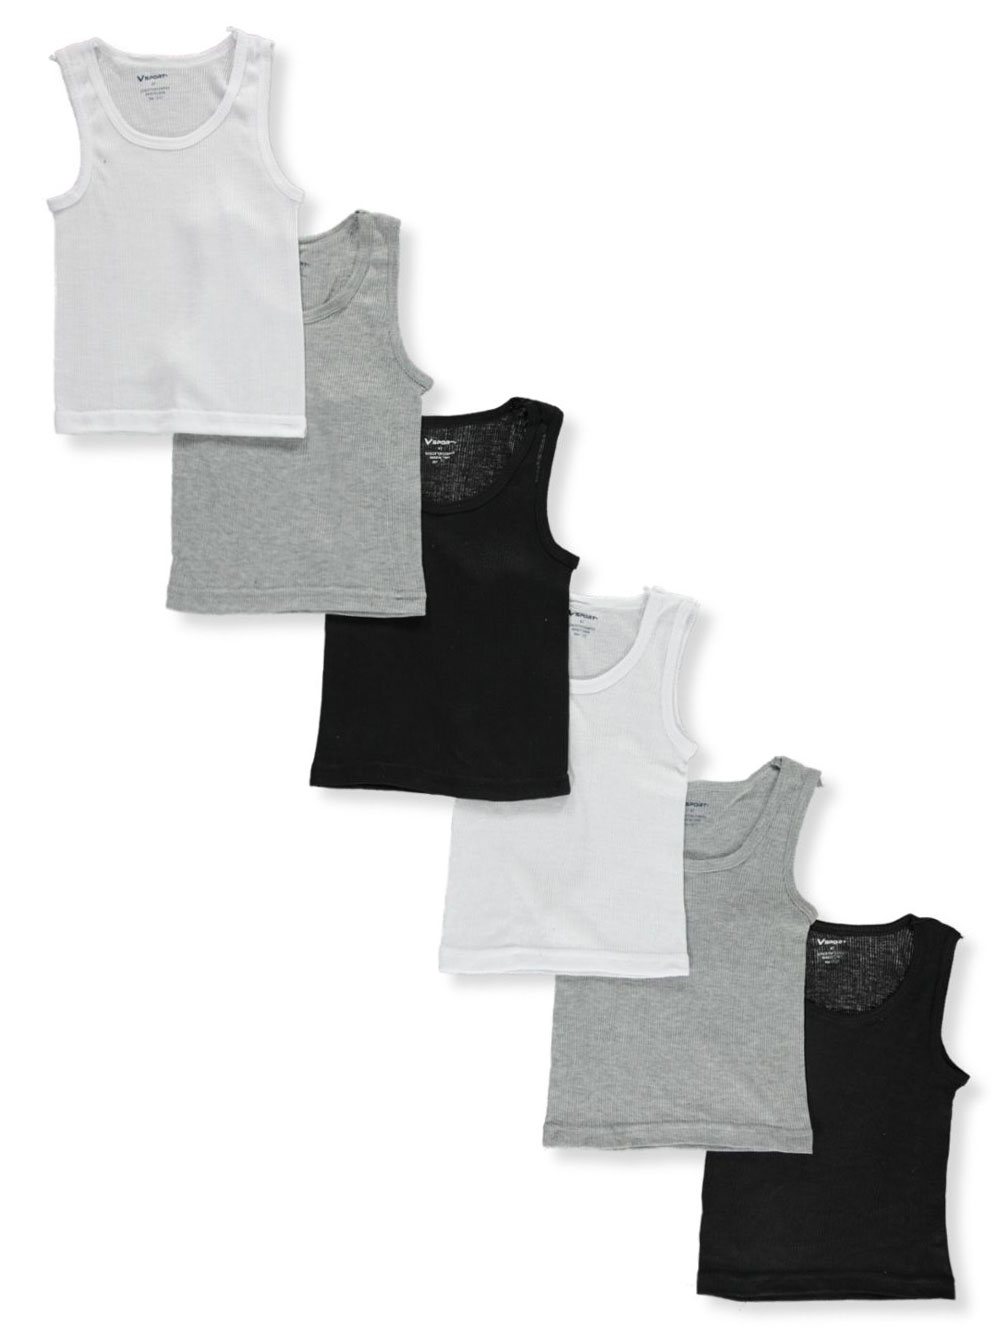 Boys White and Multicolor Undershirts